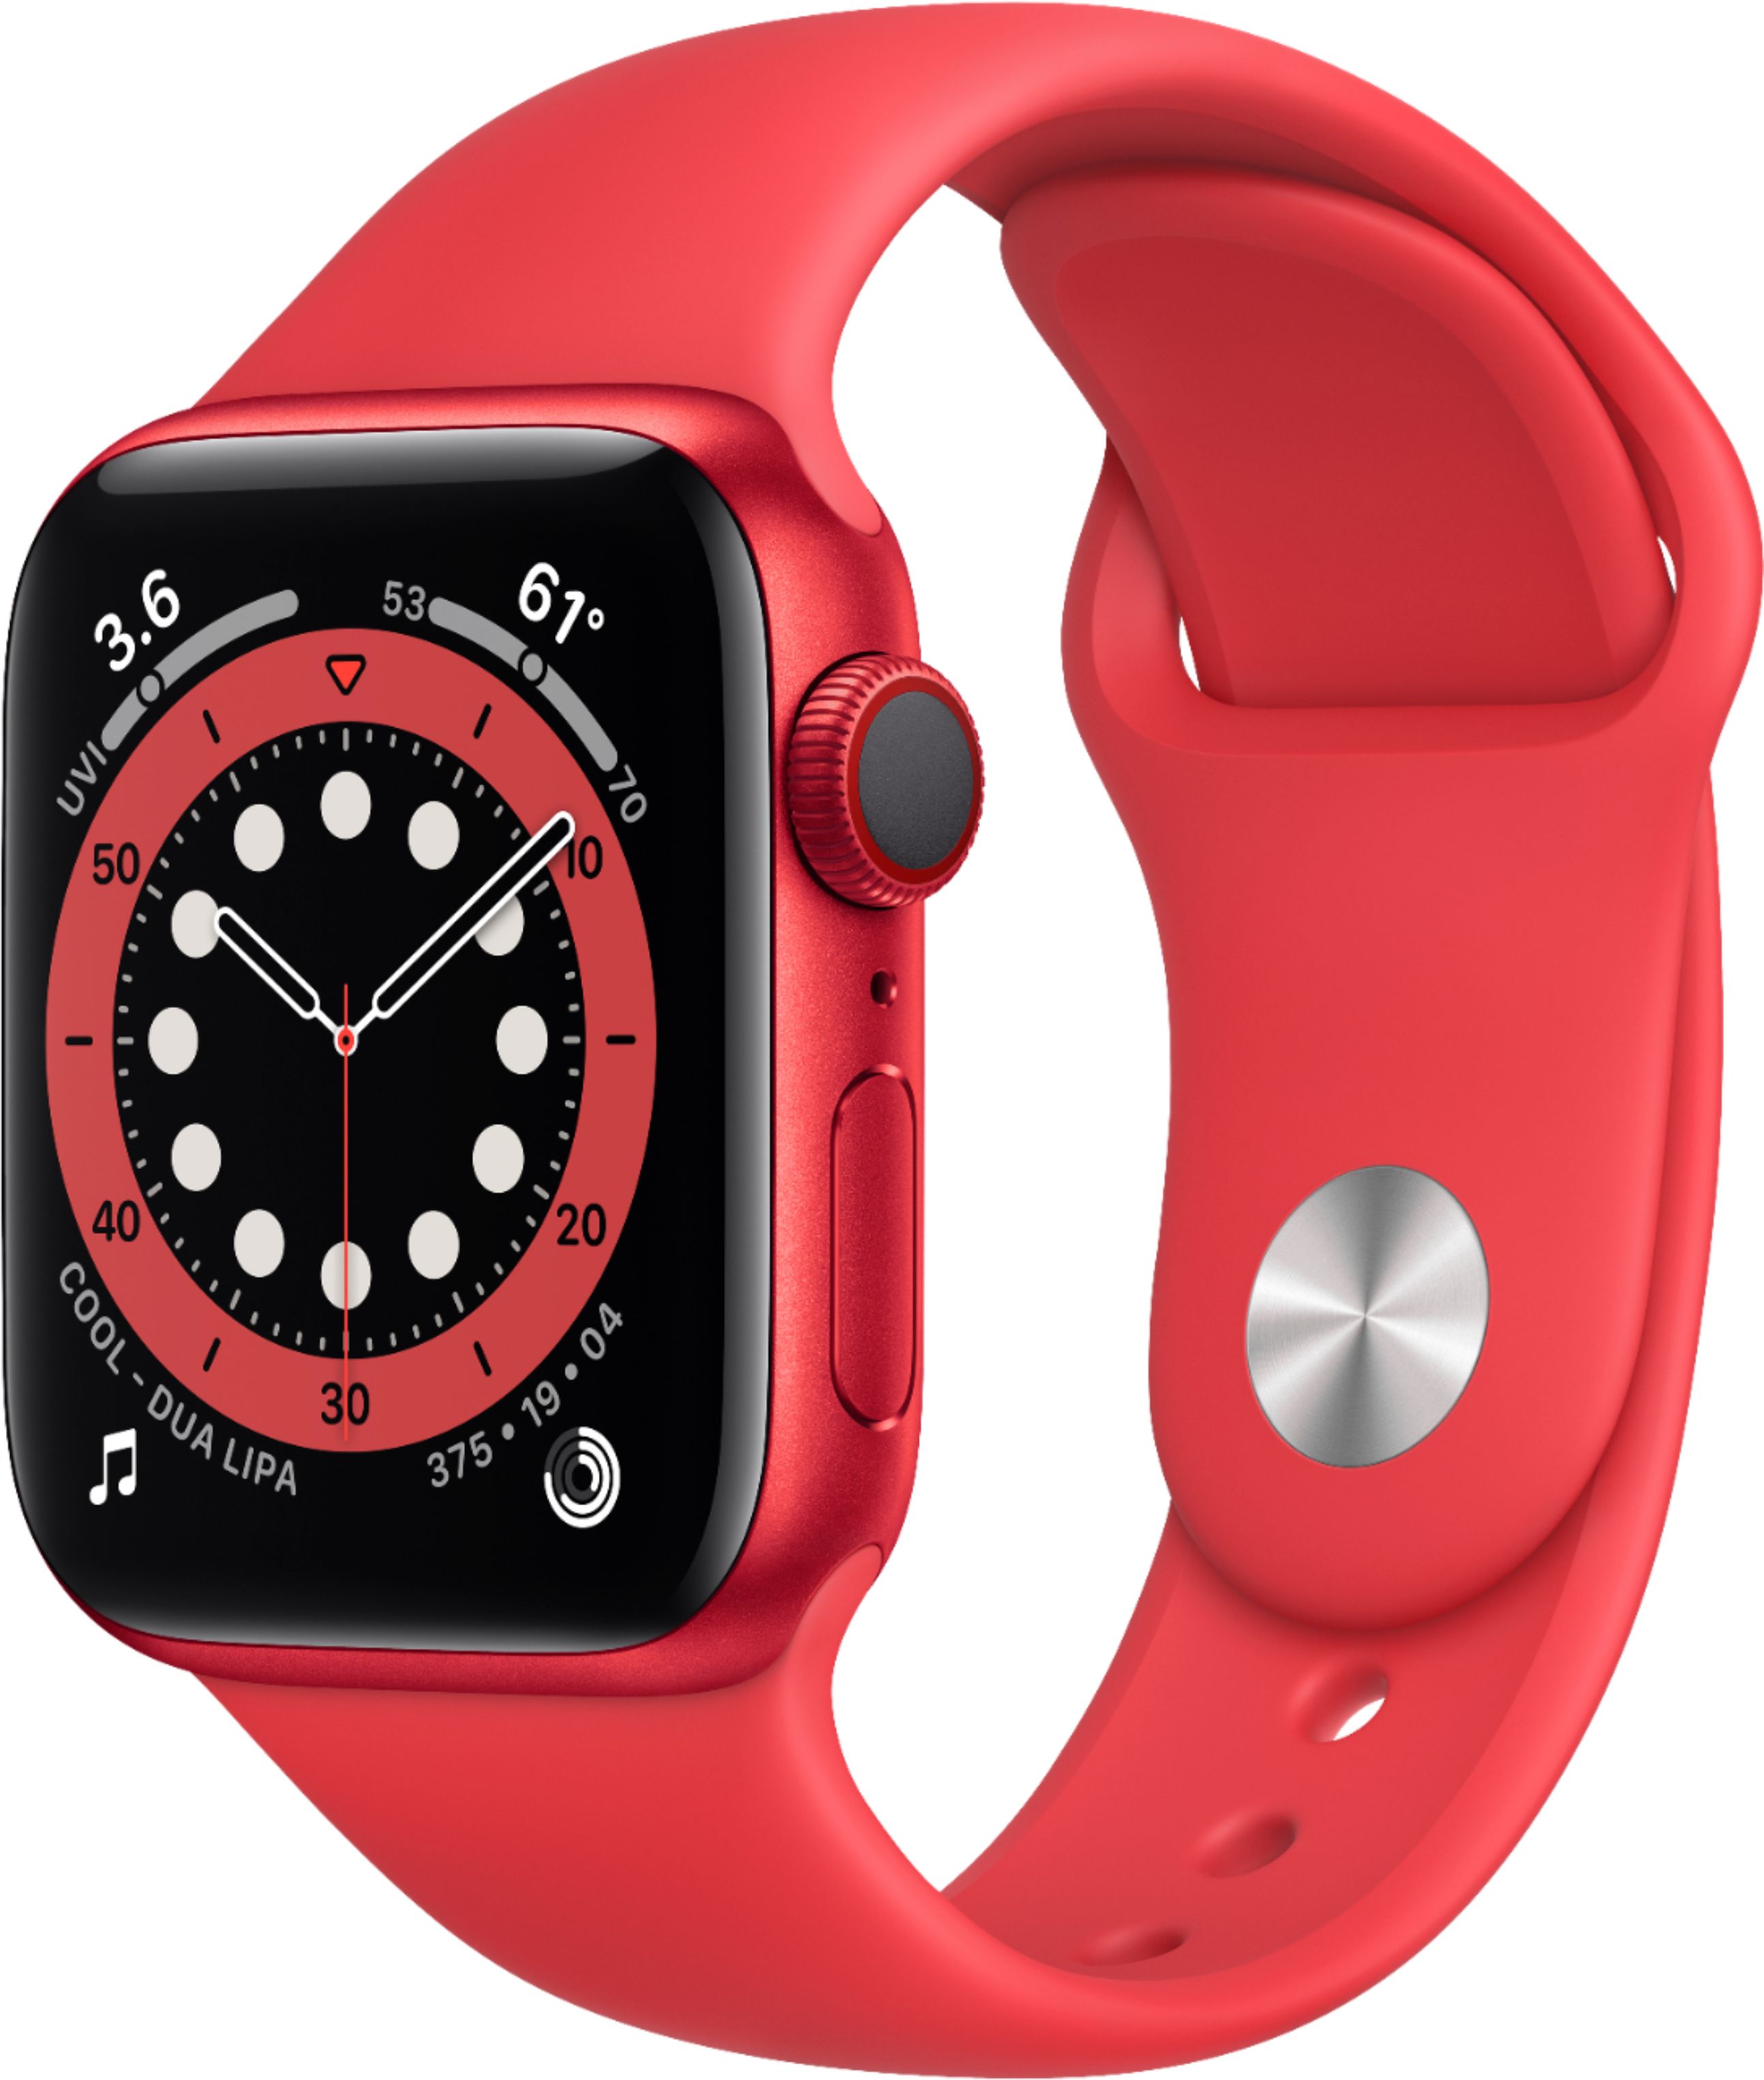 Apple Watch Series 6 (GPS + Cellular) 40mm Aluminum Case with